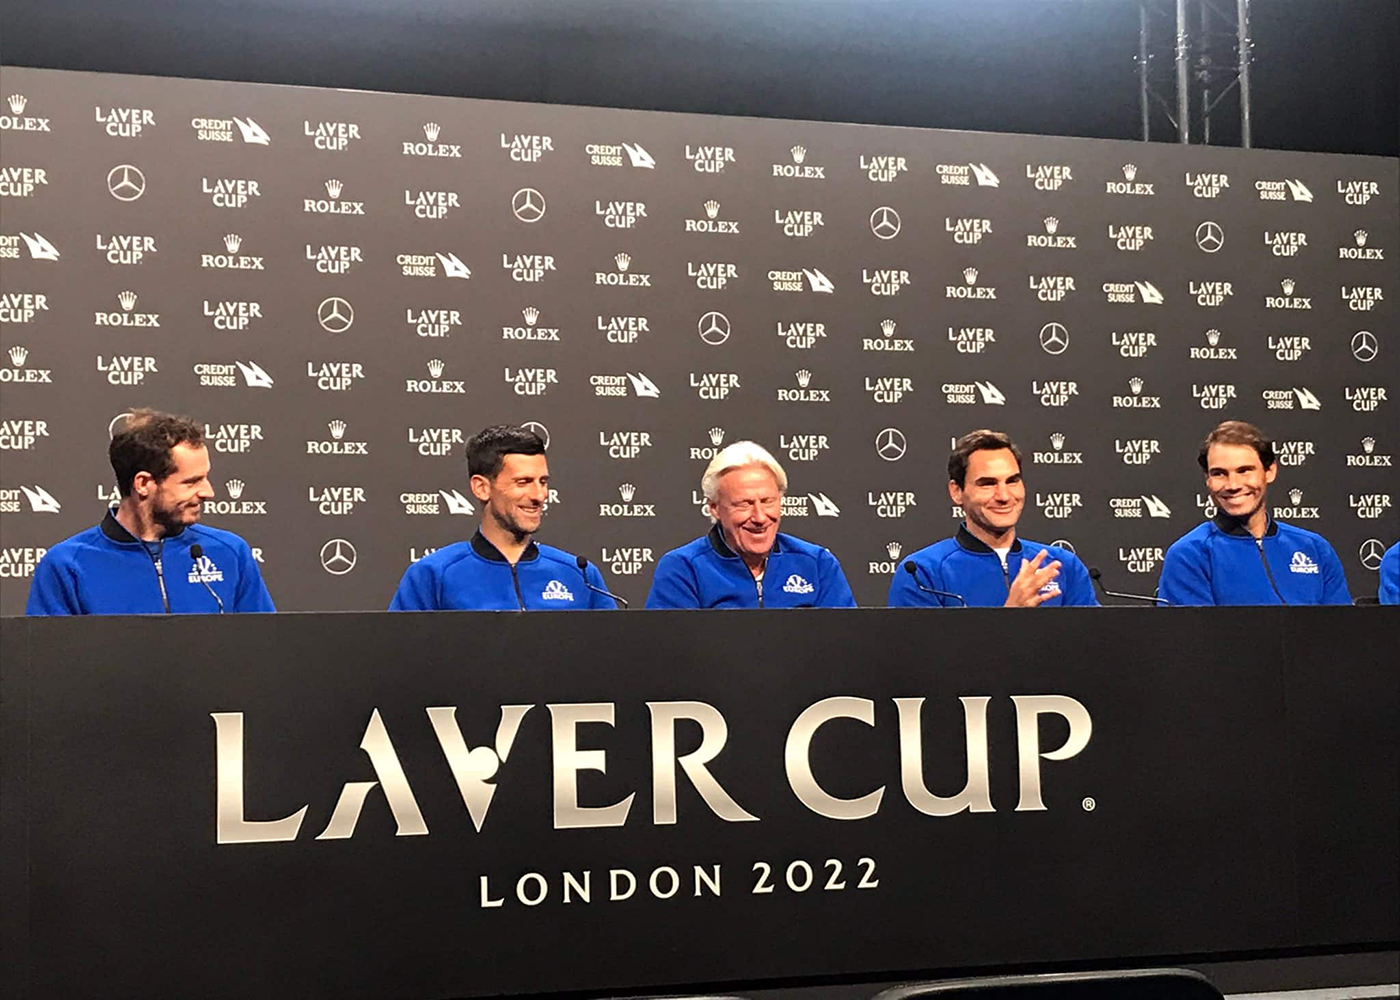 Roger Federer`s last match will be doubles with Rafael Nadal as partner at Laver Cup 2022, SEE PICS 